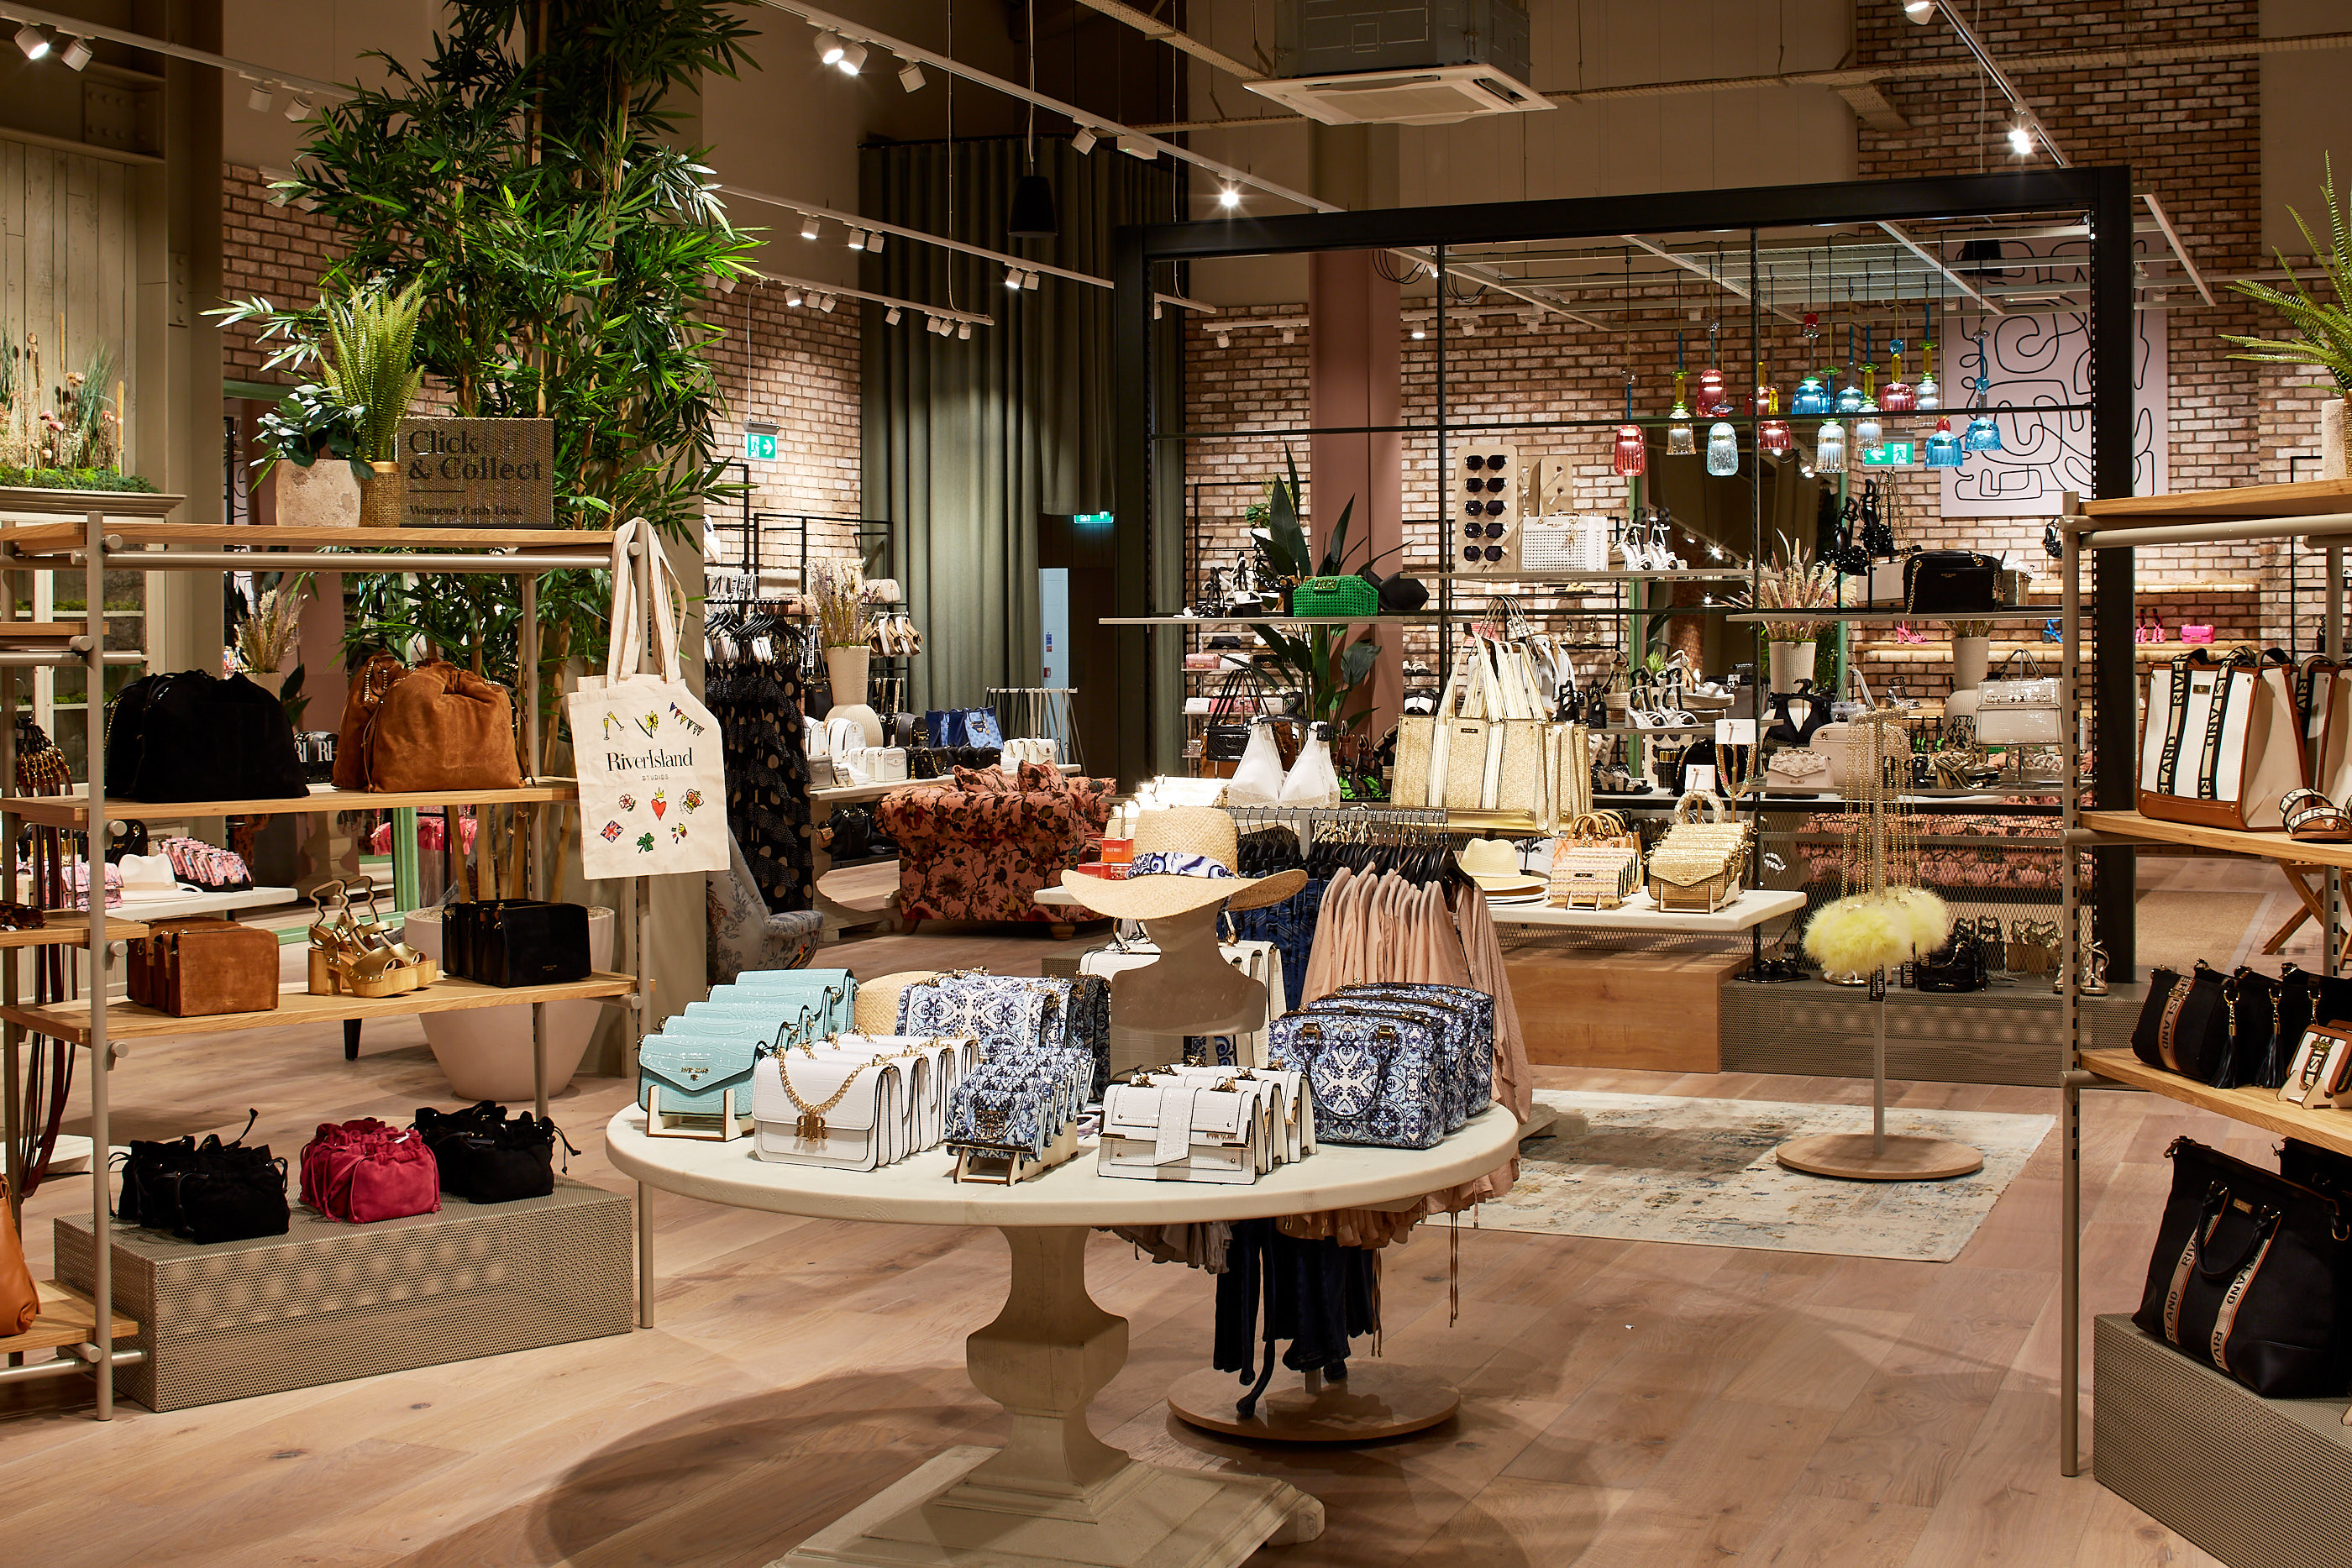 See How River Island is Designing Retail Spaces for Modern Times